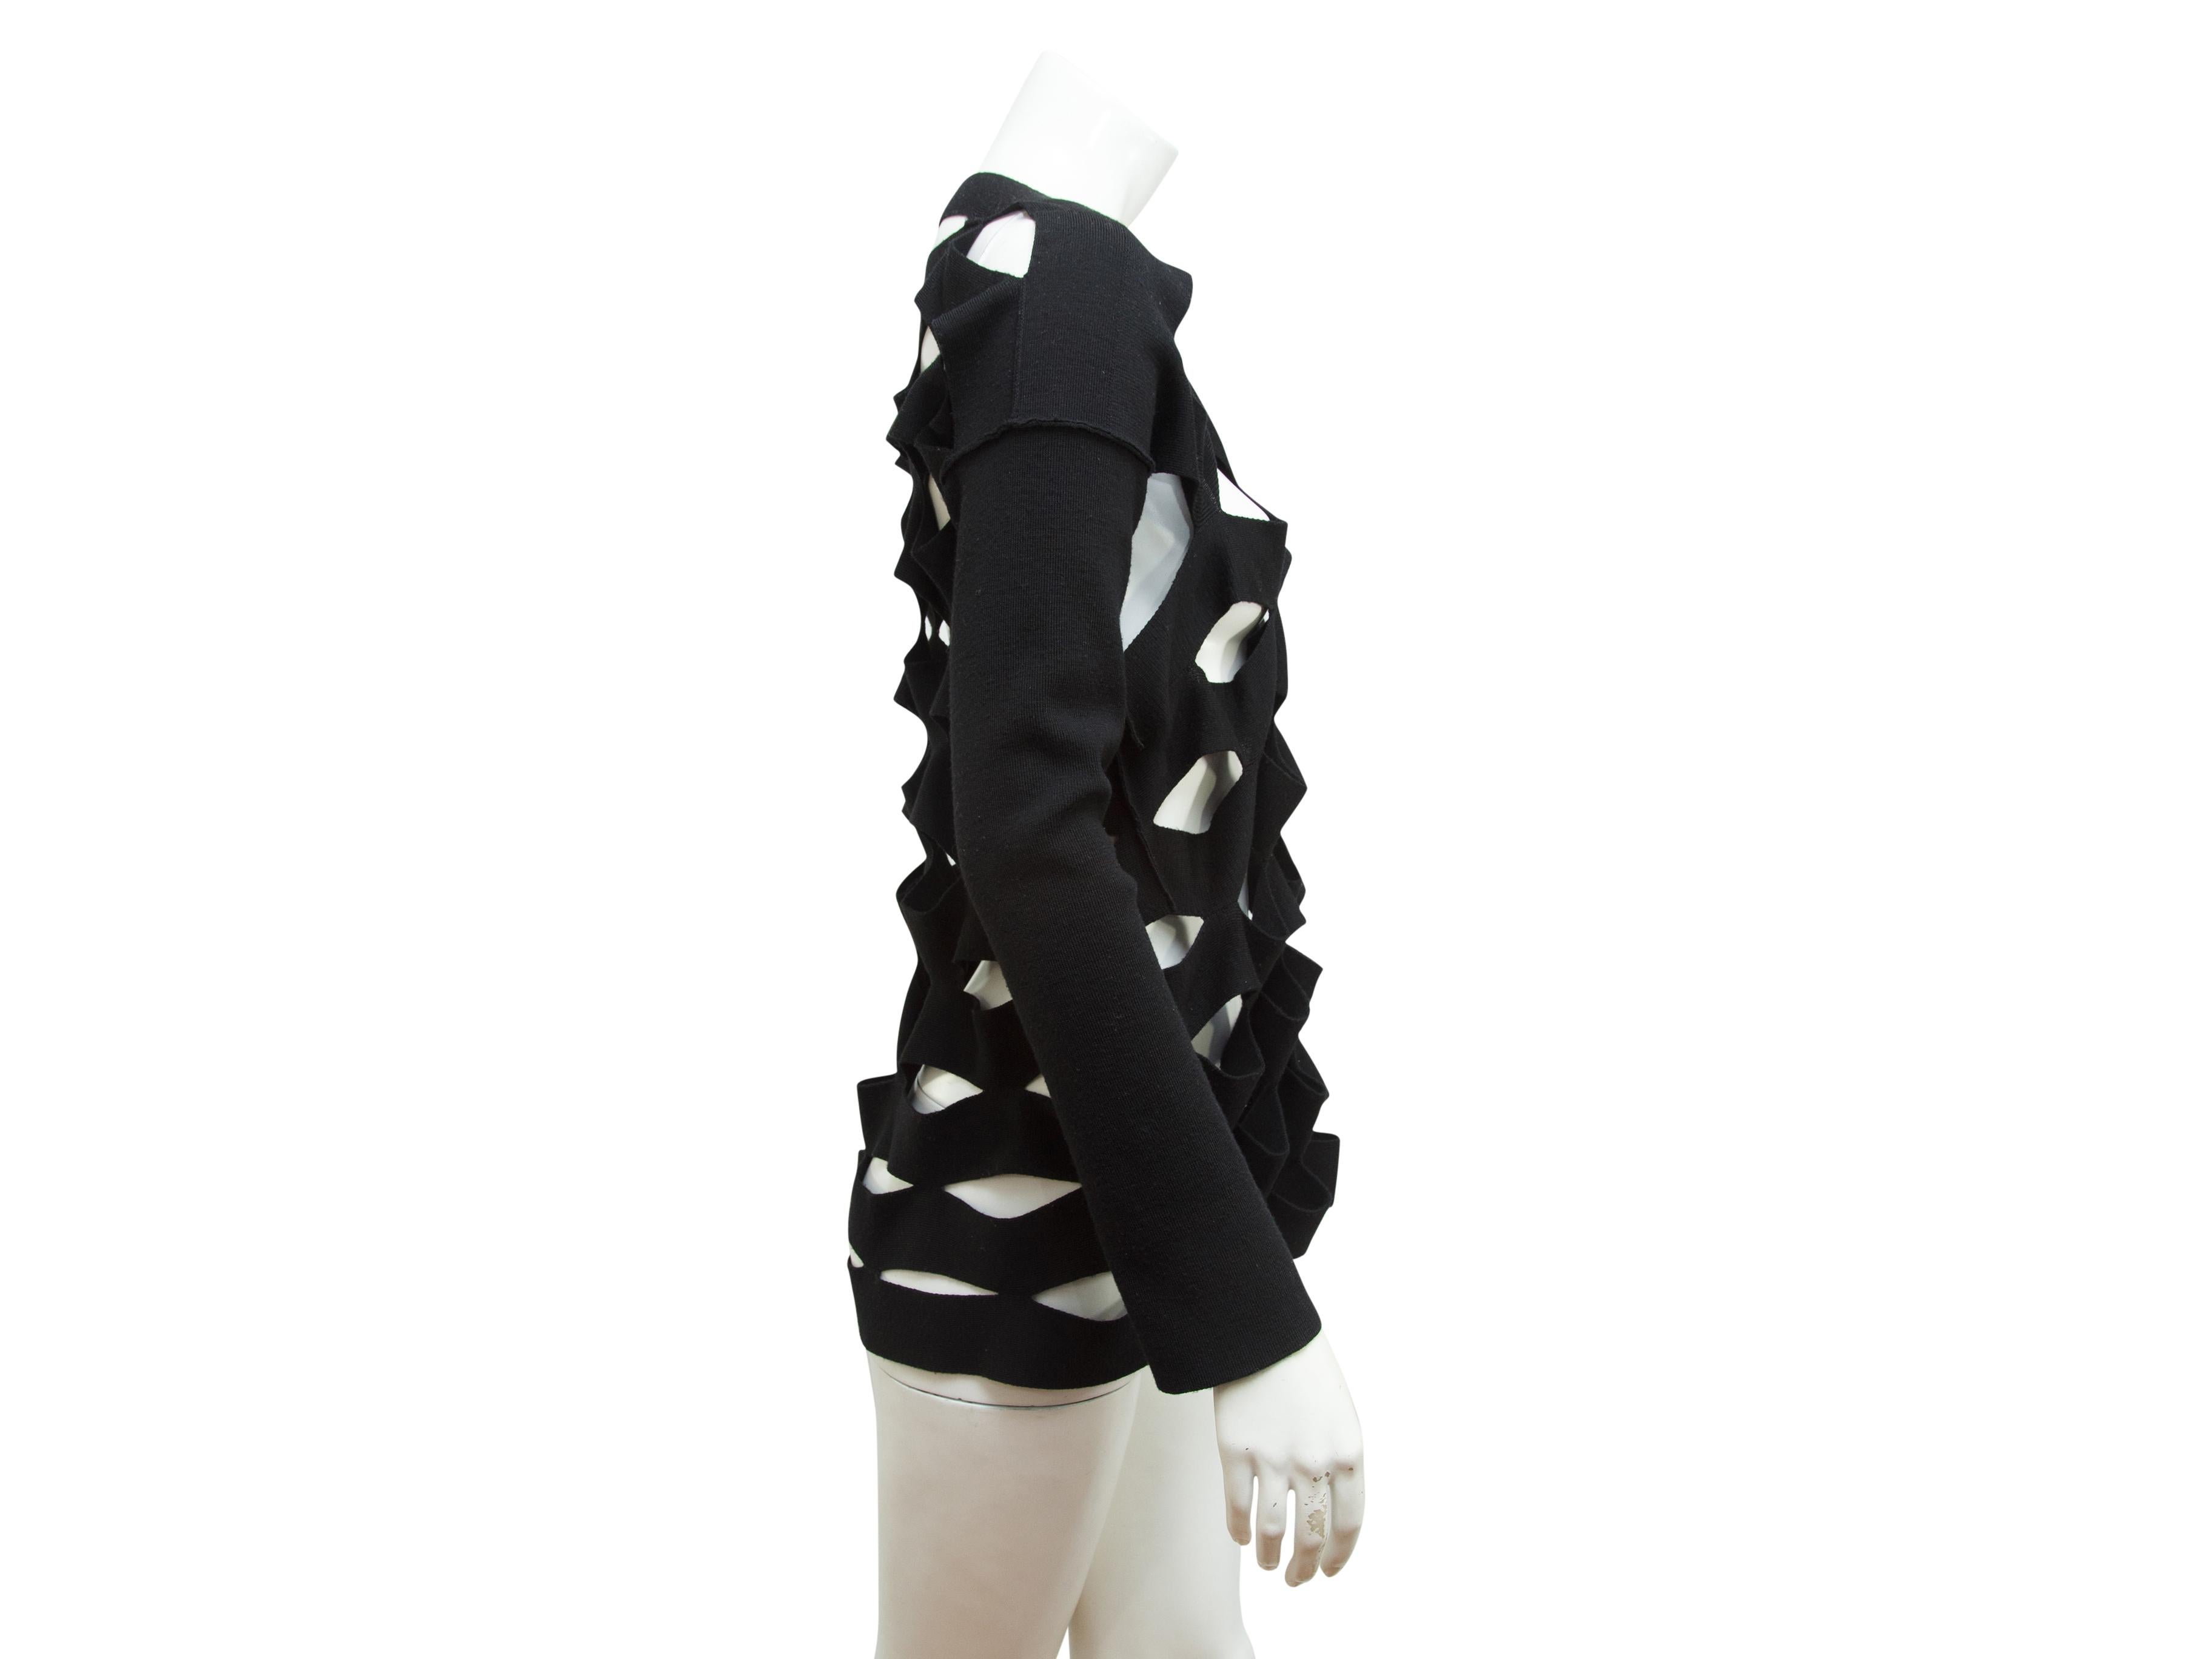 Product details:  Black cutout wool sweater by Junya Watanabe Comme des Garcon.  Boatneck.  Long sleeves.  Pullover style.  27